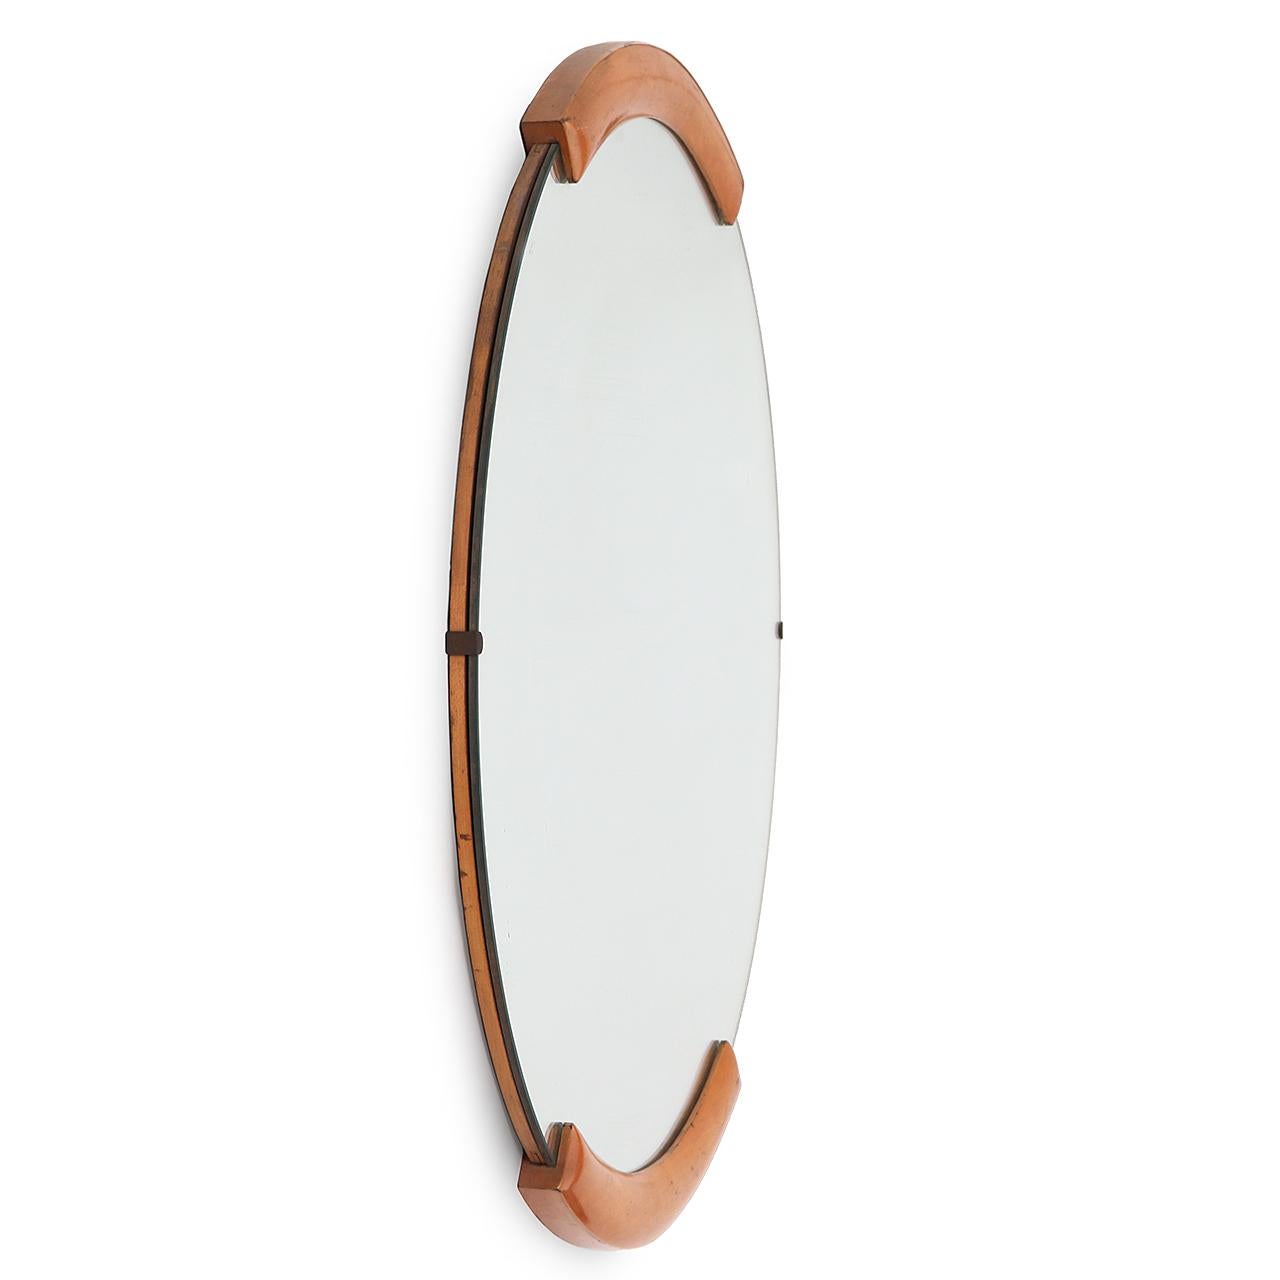 A masterfully simple Art Deco maple-accented wall mirror from Russel Wright's seminal American modern furniture line.